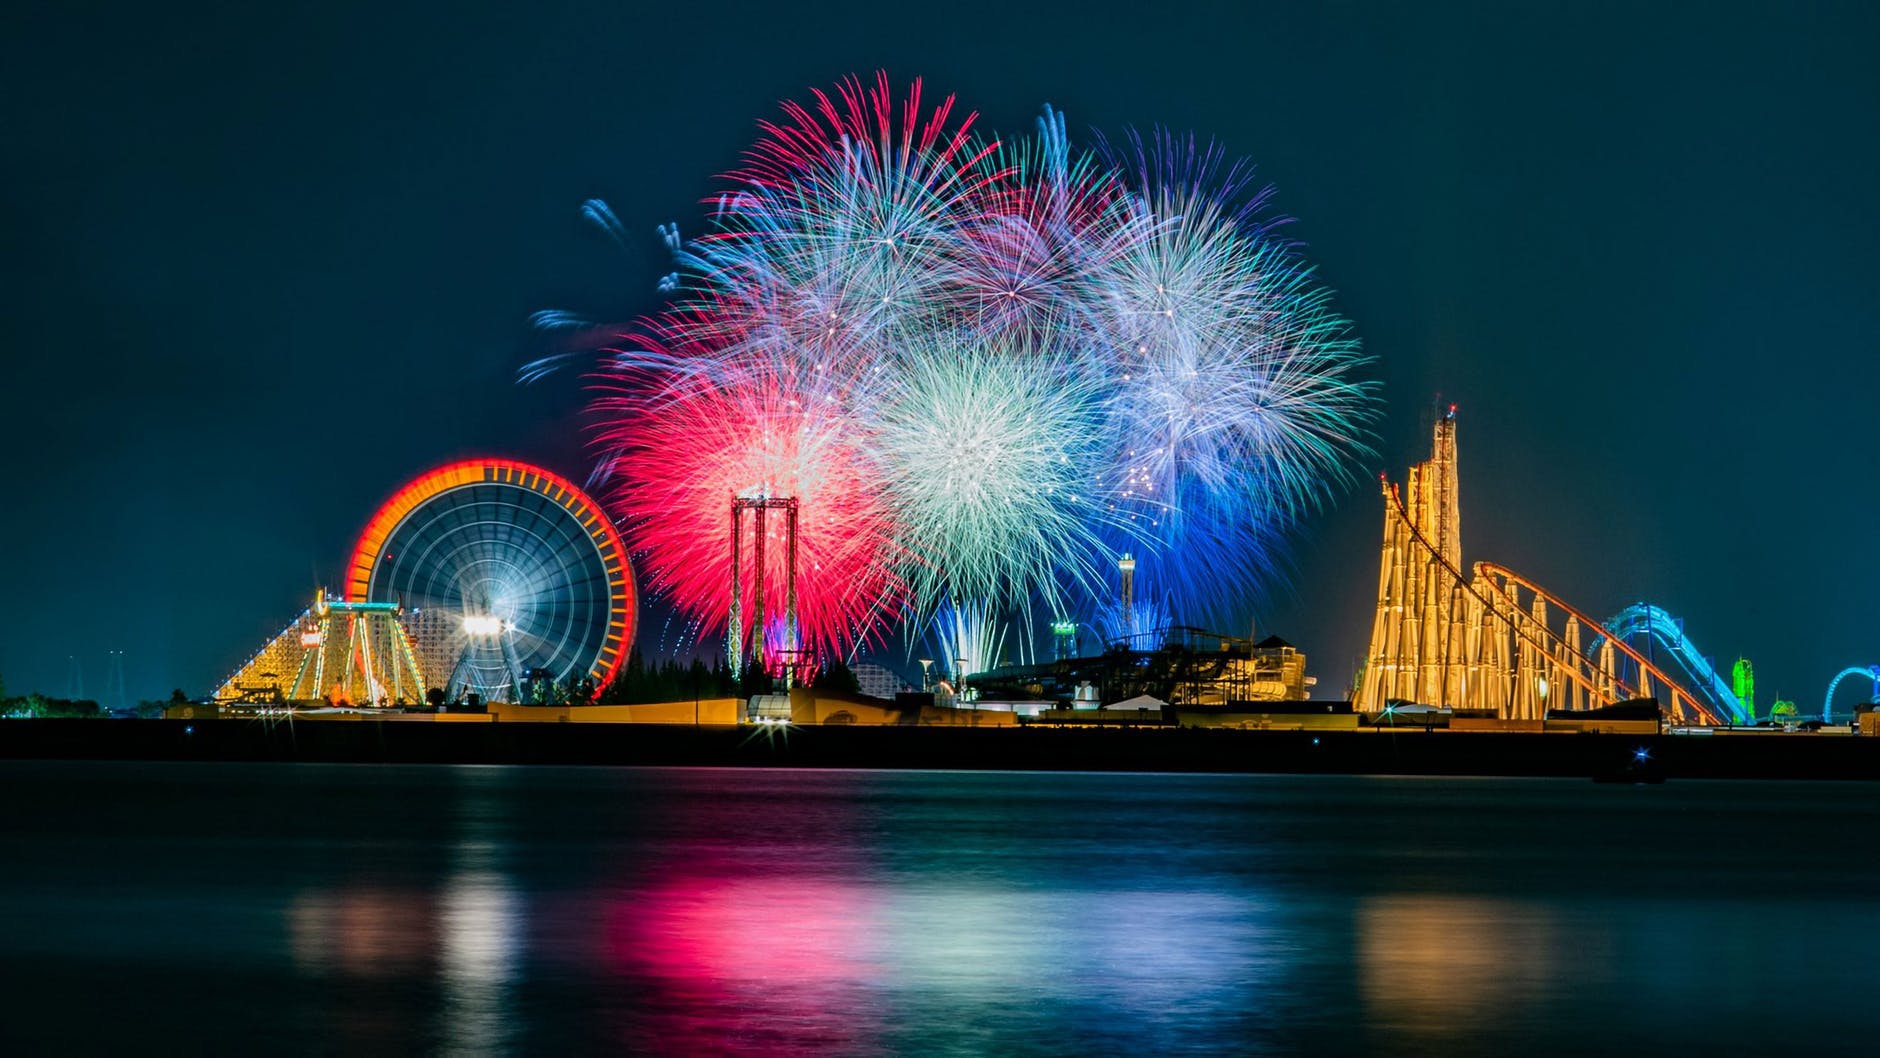 bright fireworks in sky over amusement park and lake